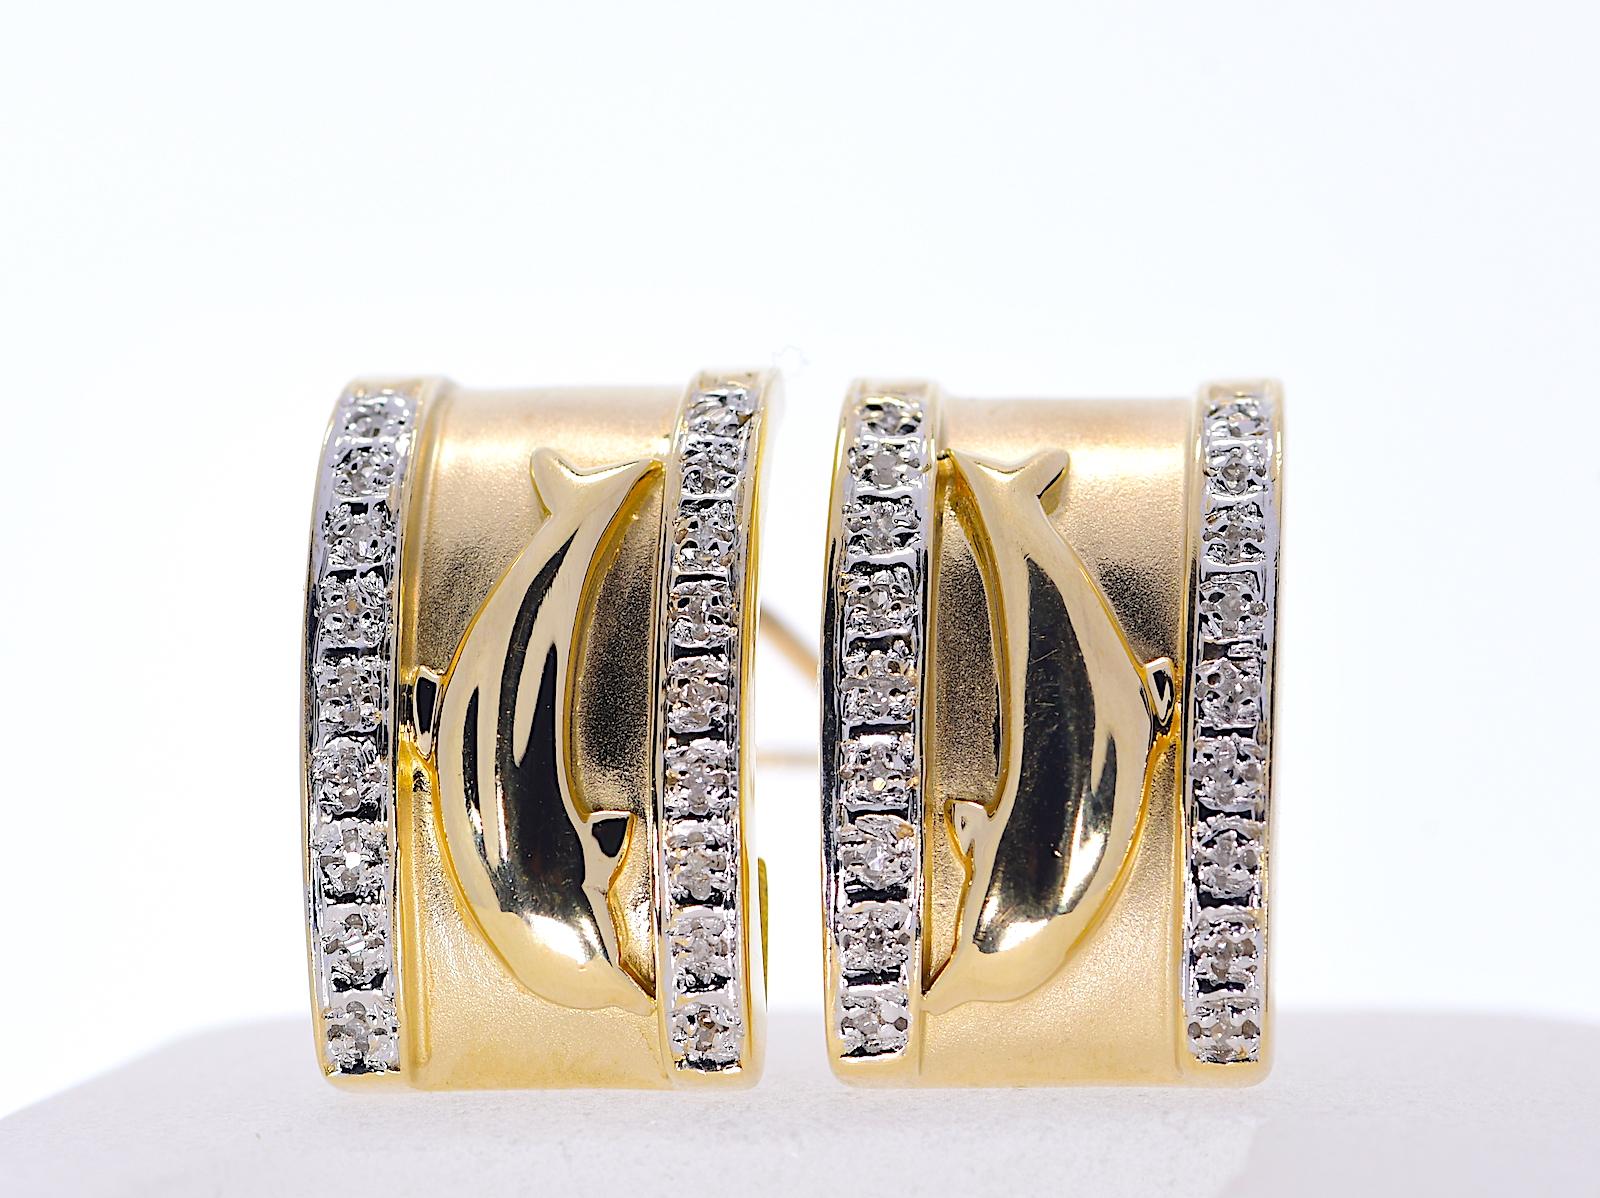 14k Yellow Gold Dolphin Half Cuff with Diamonds Earrings 11.70 grams

Stone: Natural Diamonds   TCW: .15   Shape: Round
Metal: Yellow Gold
Purity: 14k
Theme: Dolphin
Total Gram Weight: 11.70

JESSUP'S PRICE: $625.00!

#161248-20
Seaside Beauty!